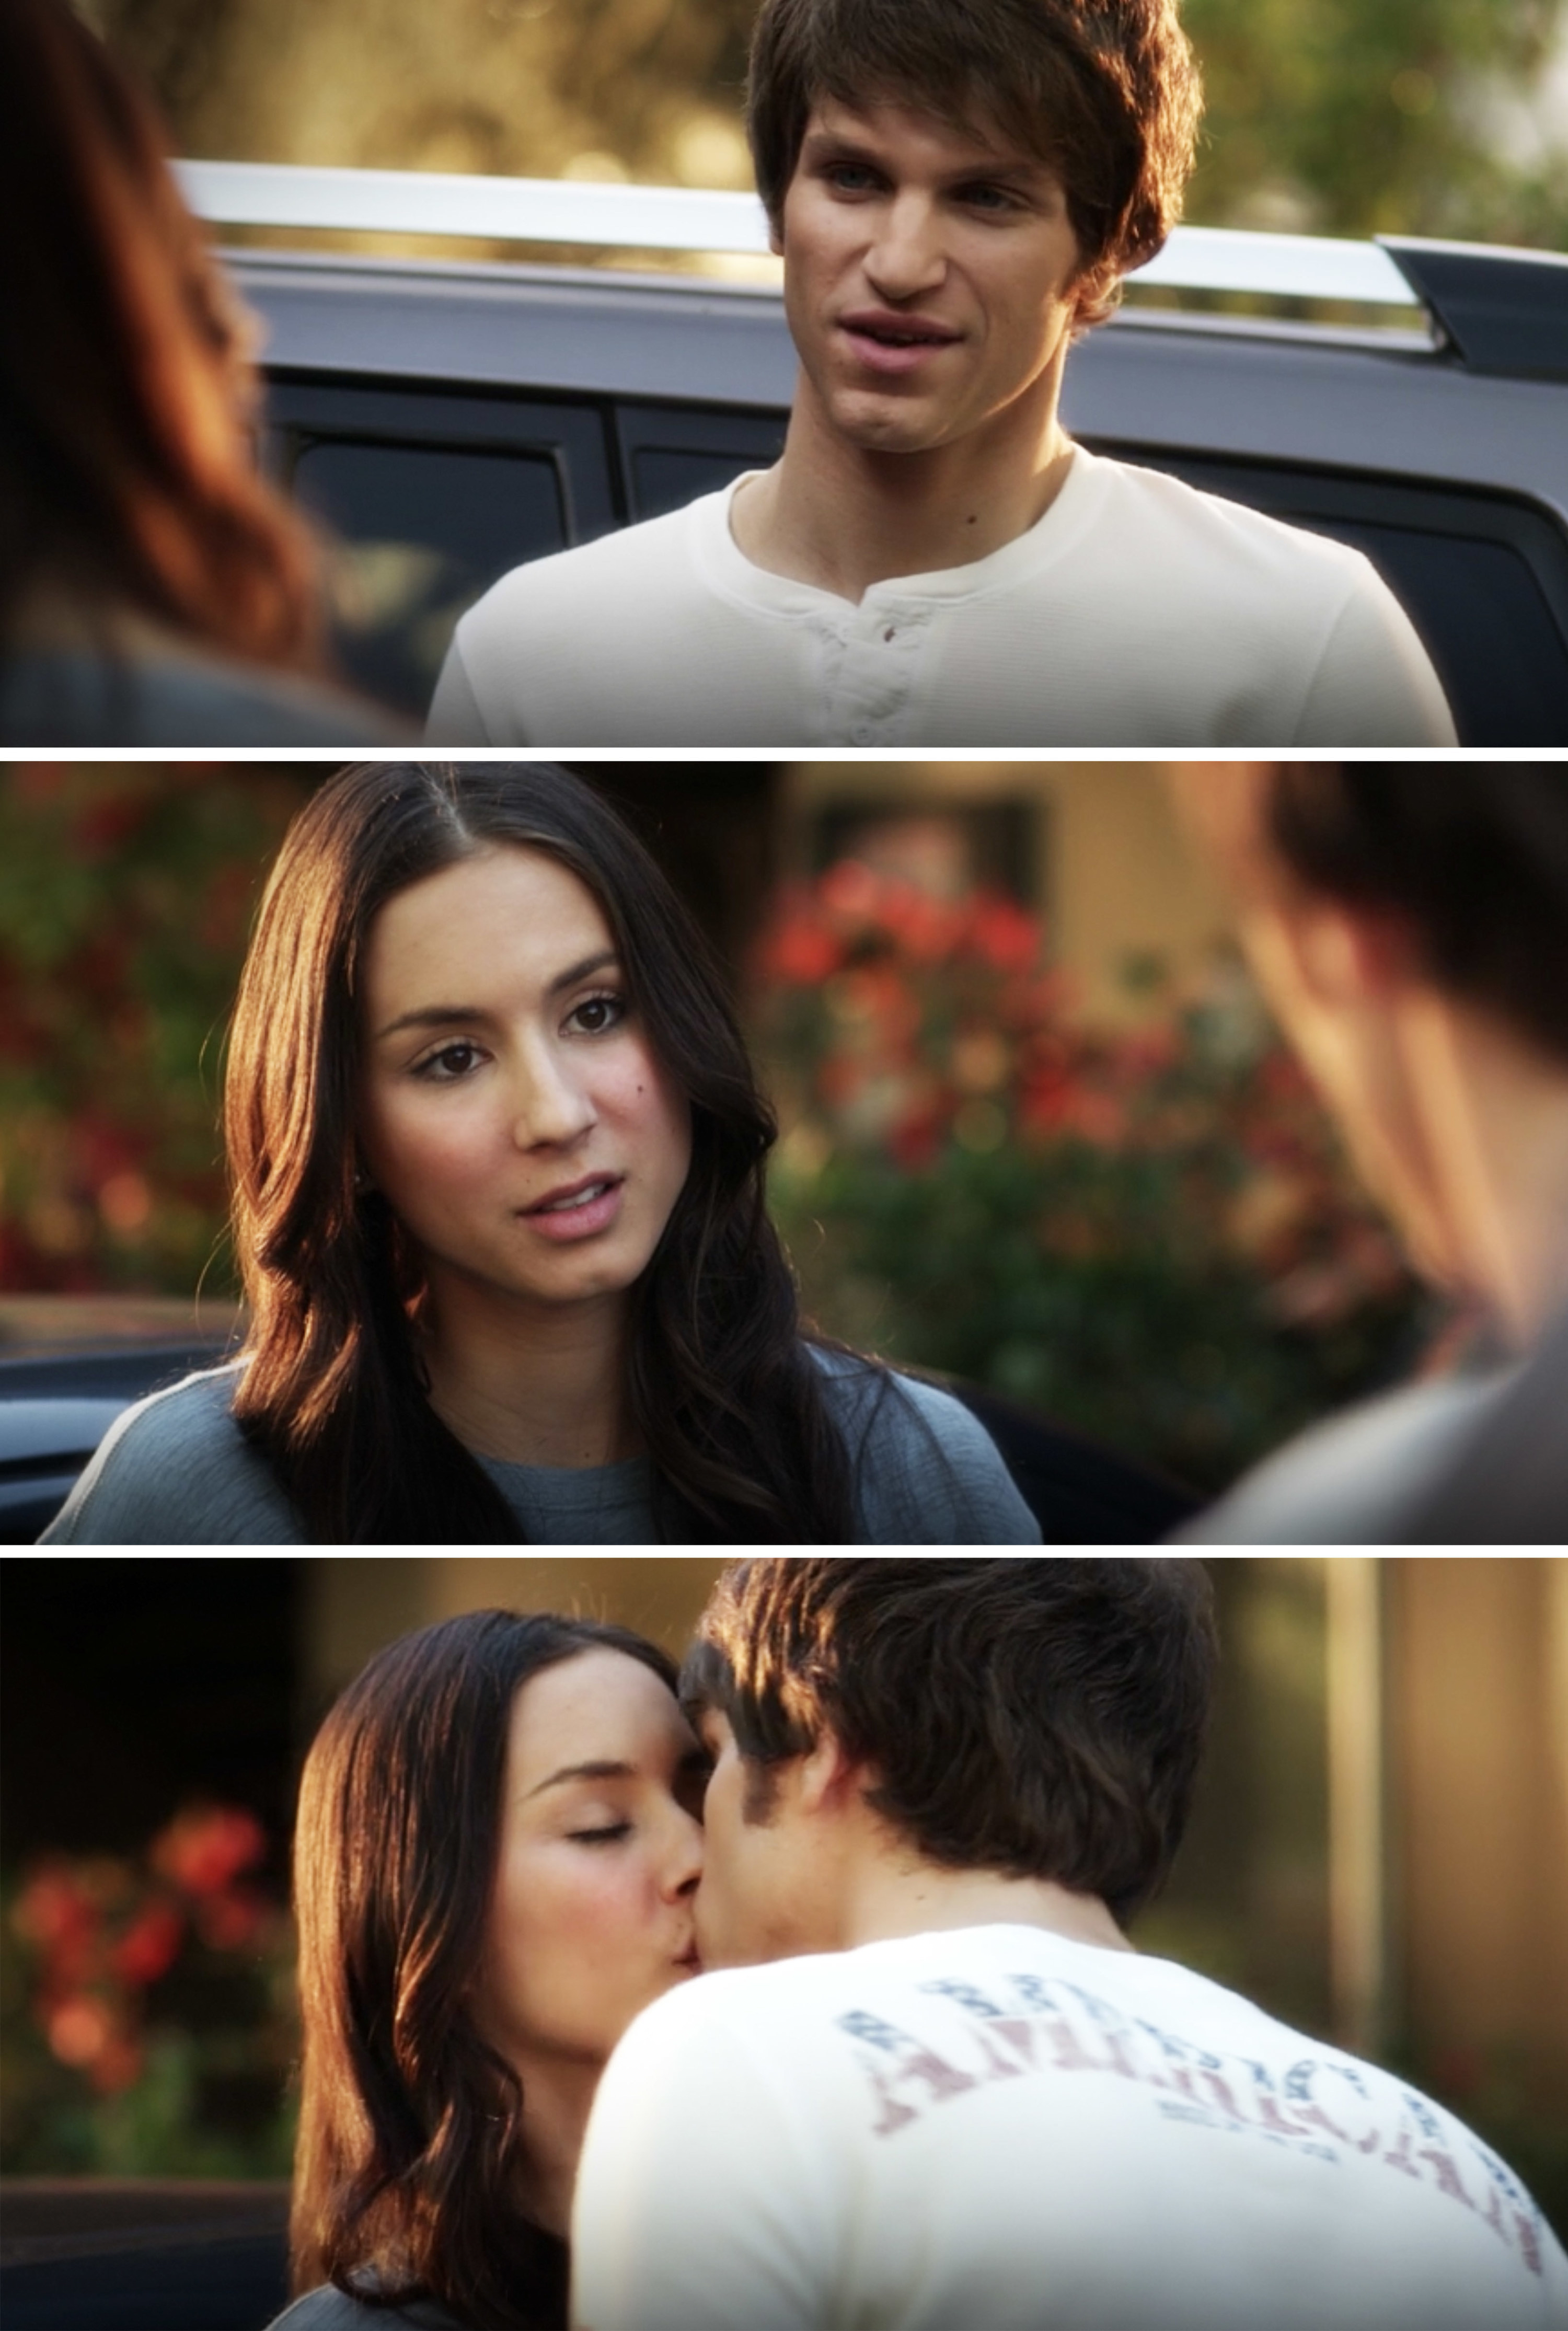 Toby and Spencer kissing for the first time